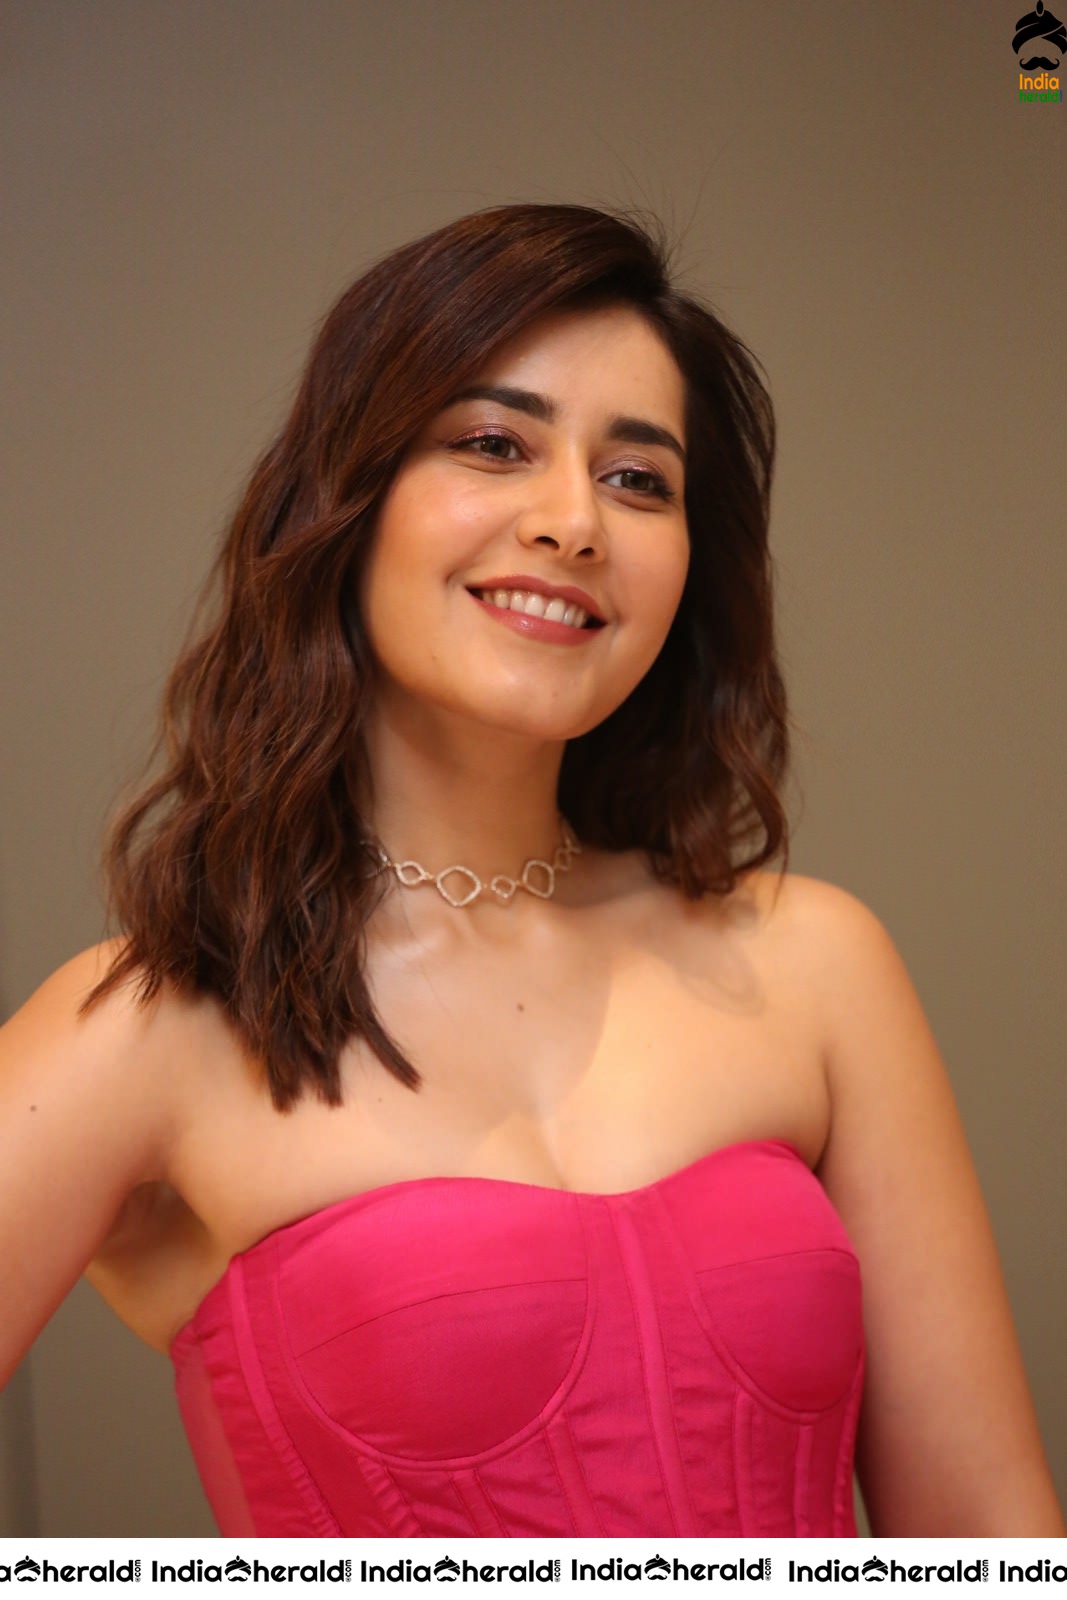 Raashi Khanna Looking like a Barbie Doll in these Latest Compilation Photos